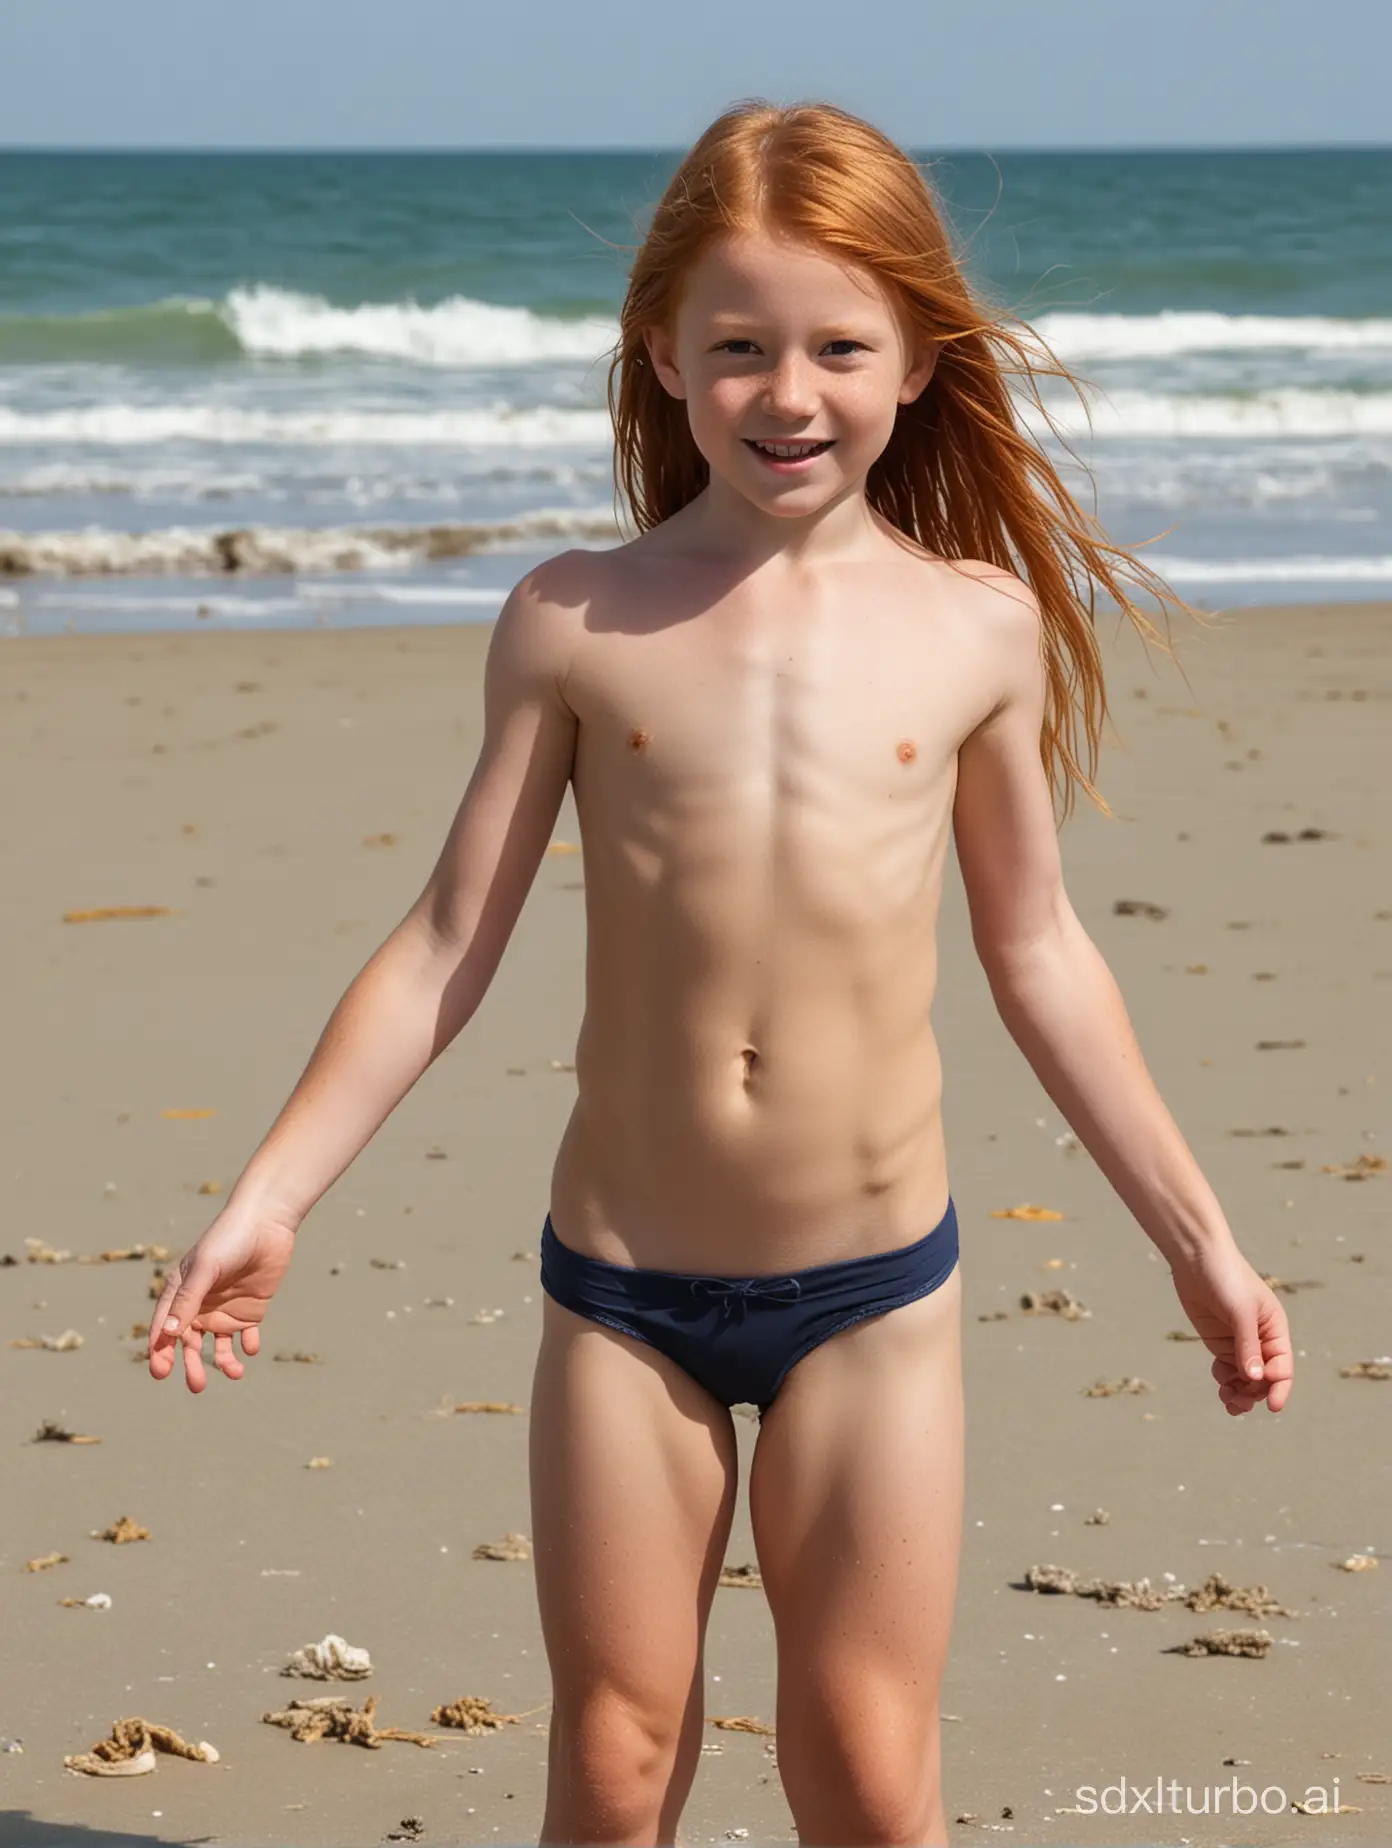 7 years old, long ginger hair, flat chested, very muscular abs, showing her belly, Odessa Beach